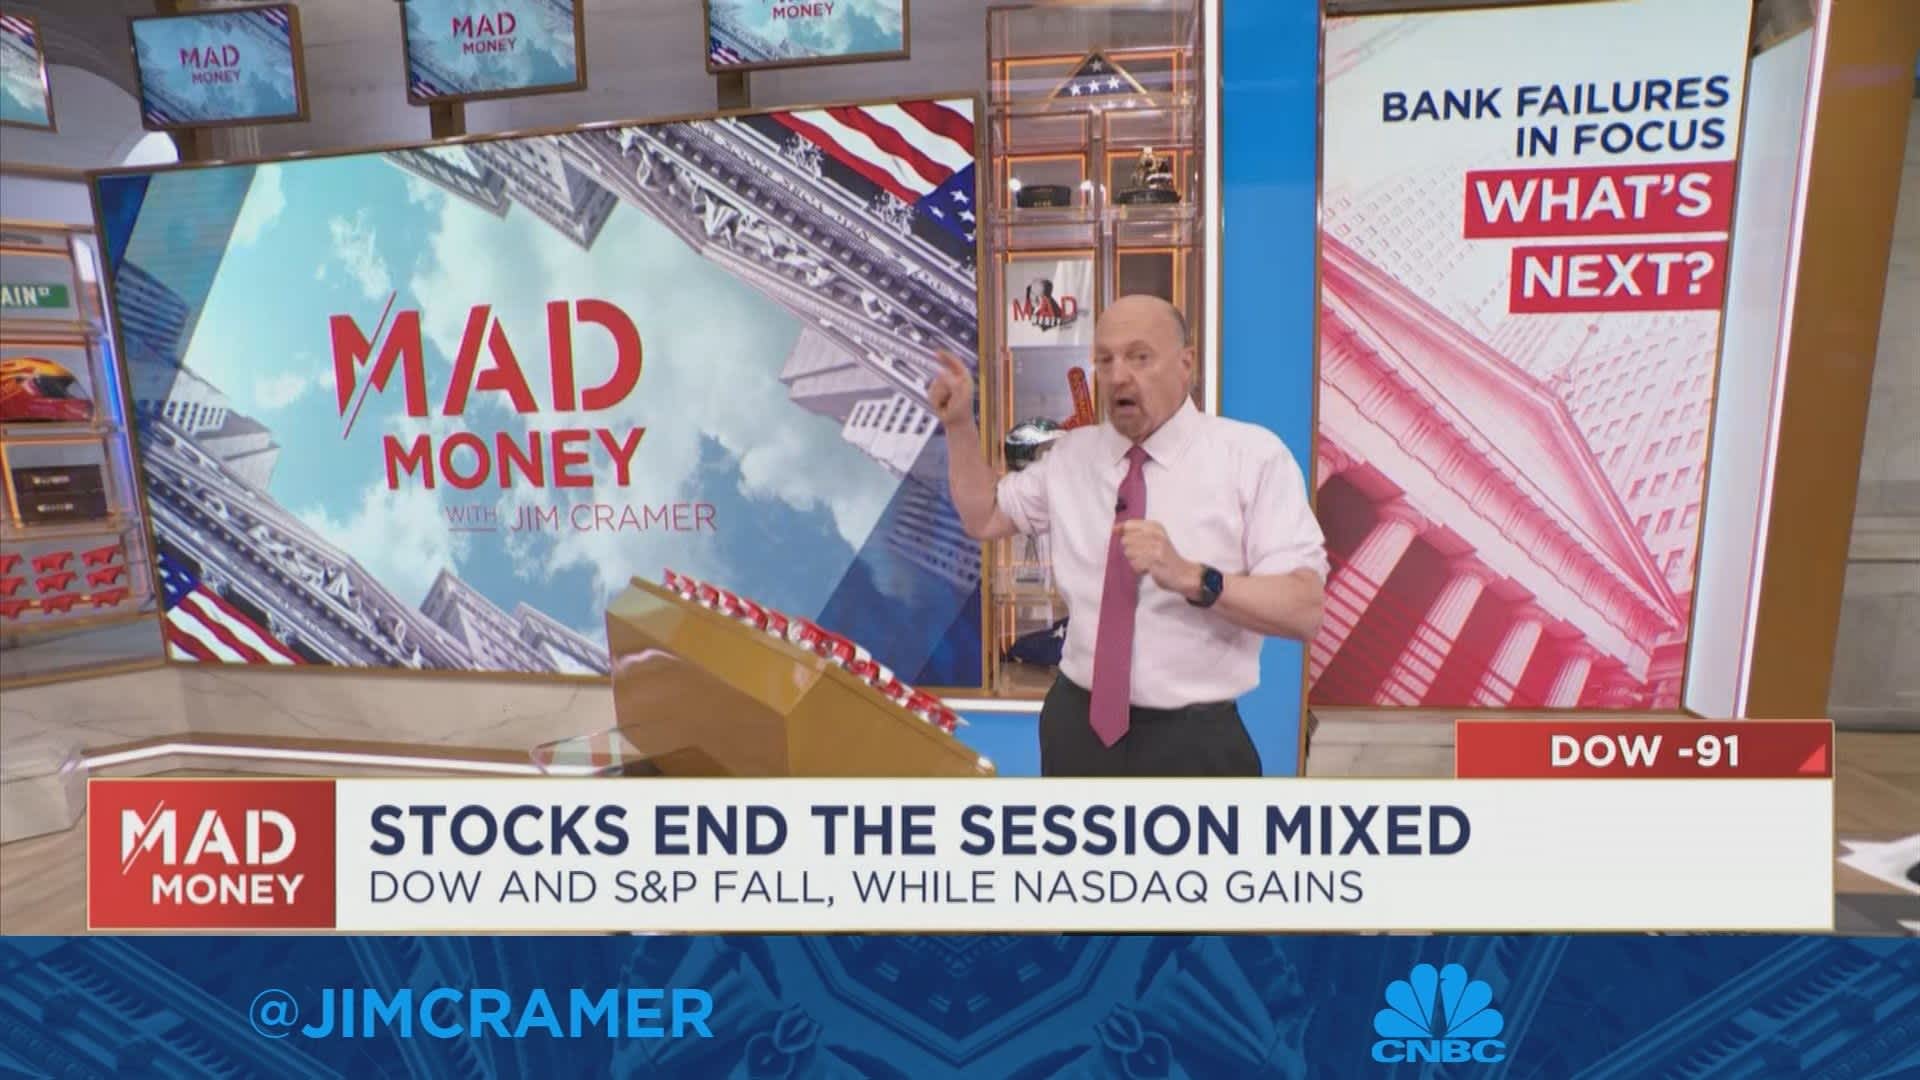 Bank failures could put crimp in Fed rate plans, says Cramer